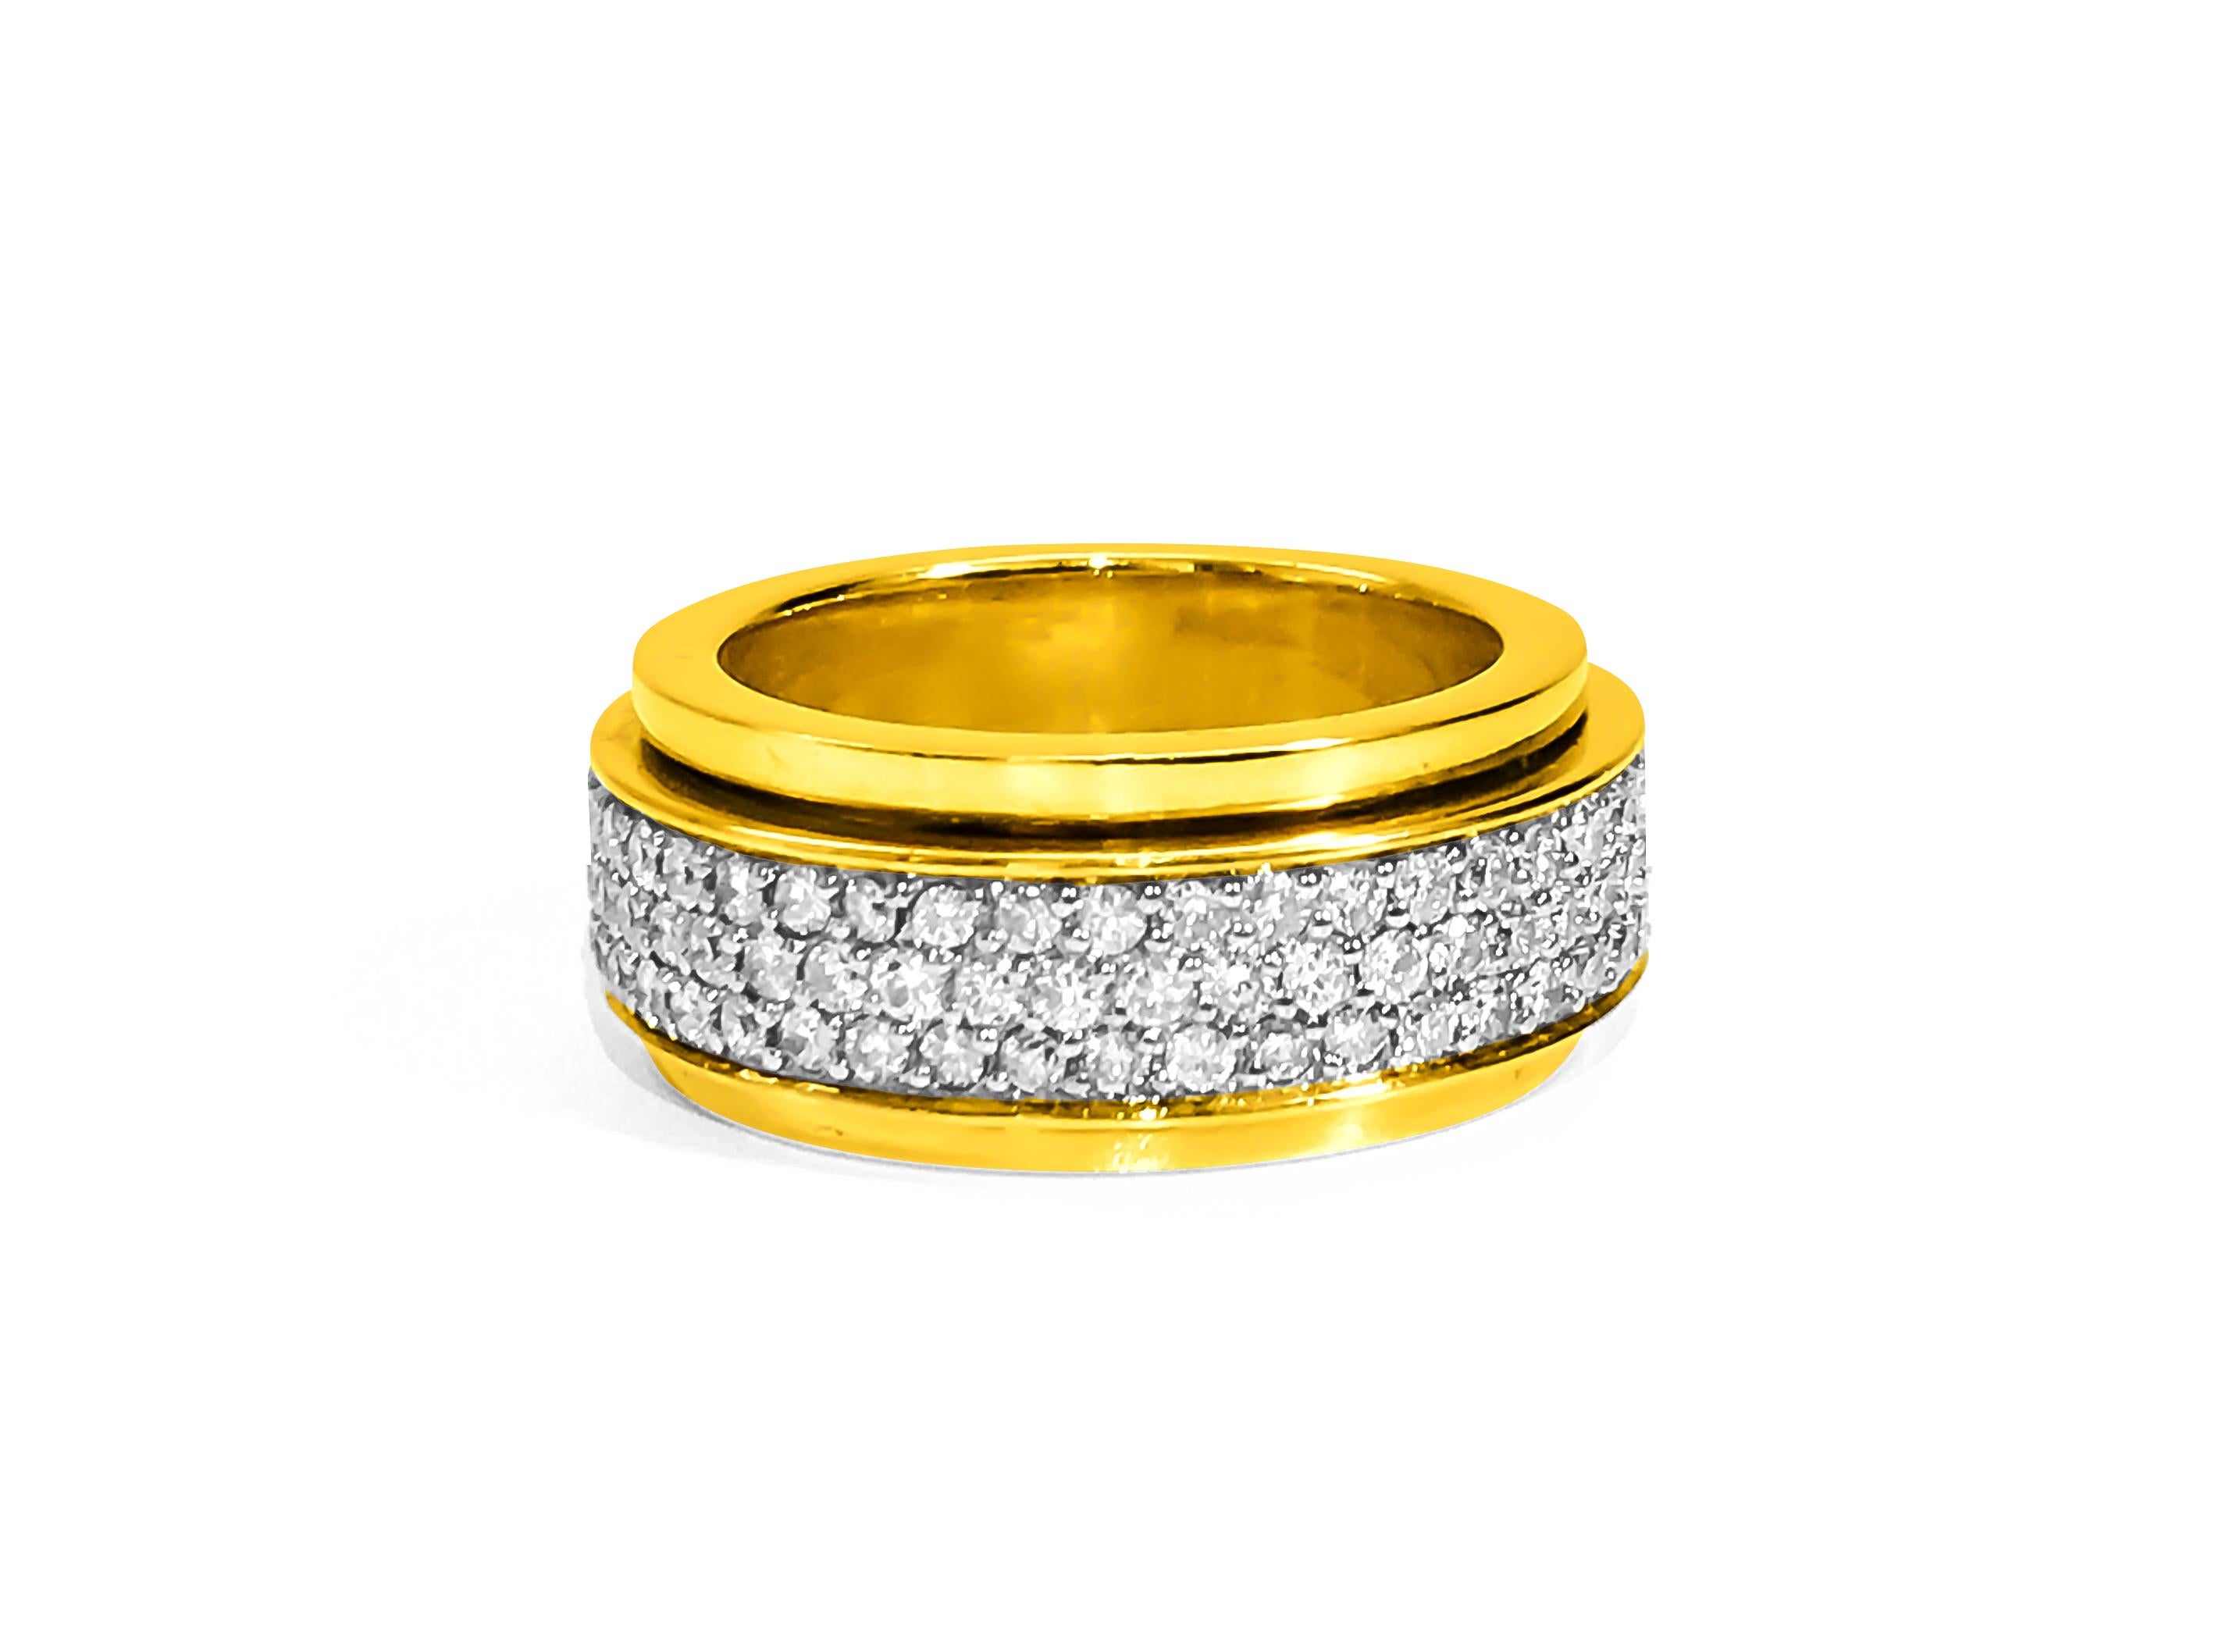 This exquisite ring boasts a luxurious design crafted from 18K yellow gold, adorned with a spectacular array of diamonds totaling 4.50 carats. Each diamond, cut in a round brilliant style, showcases exceptional clarity (VVS) and a stunning F-G color